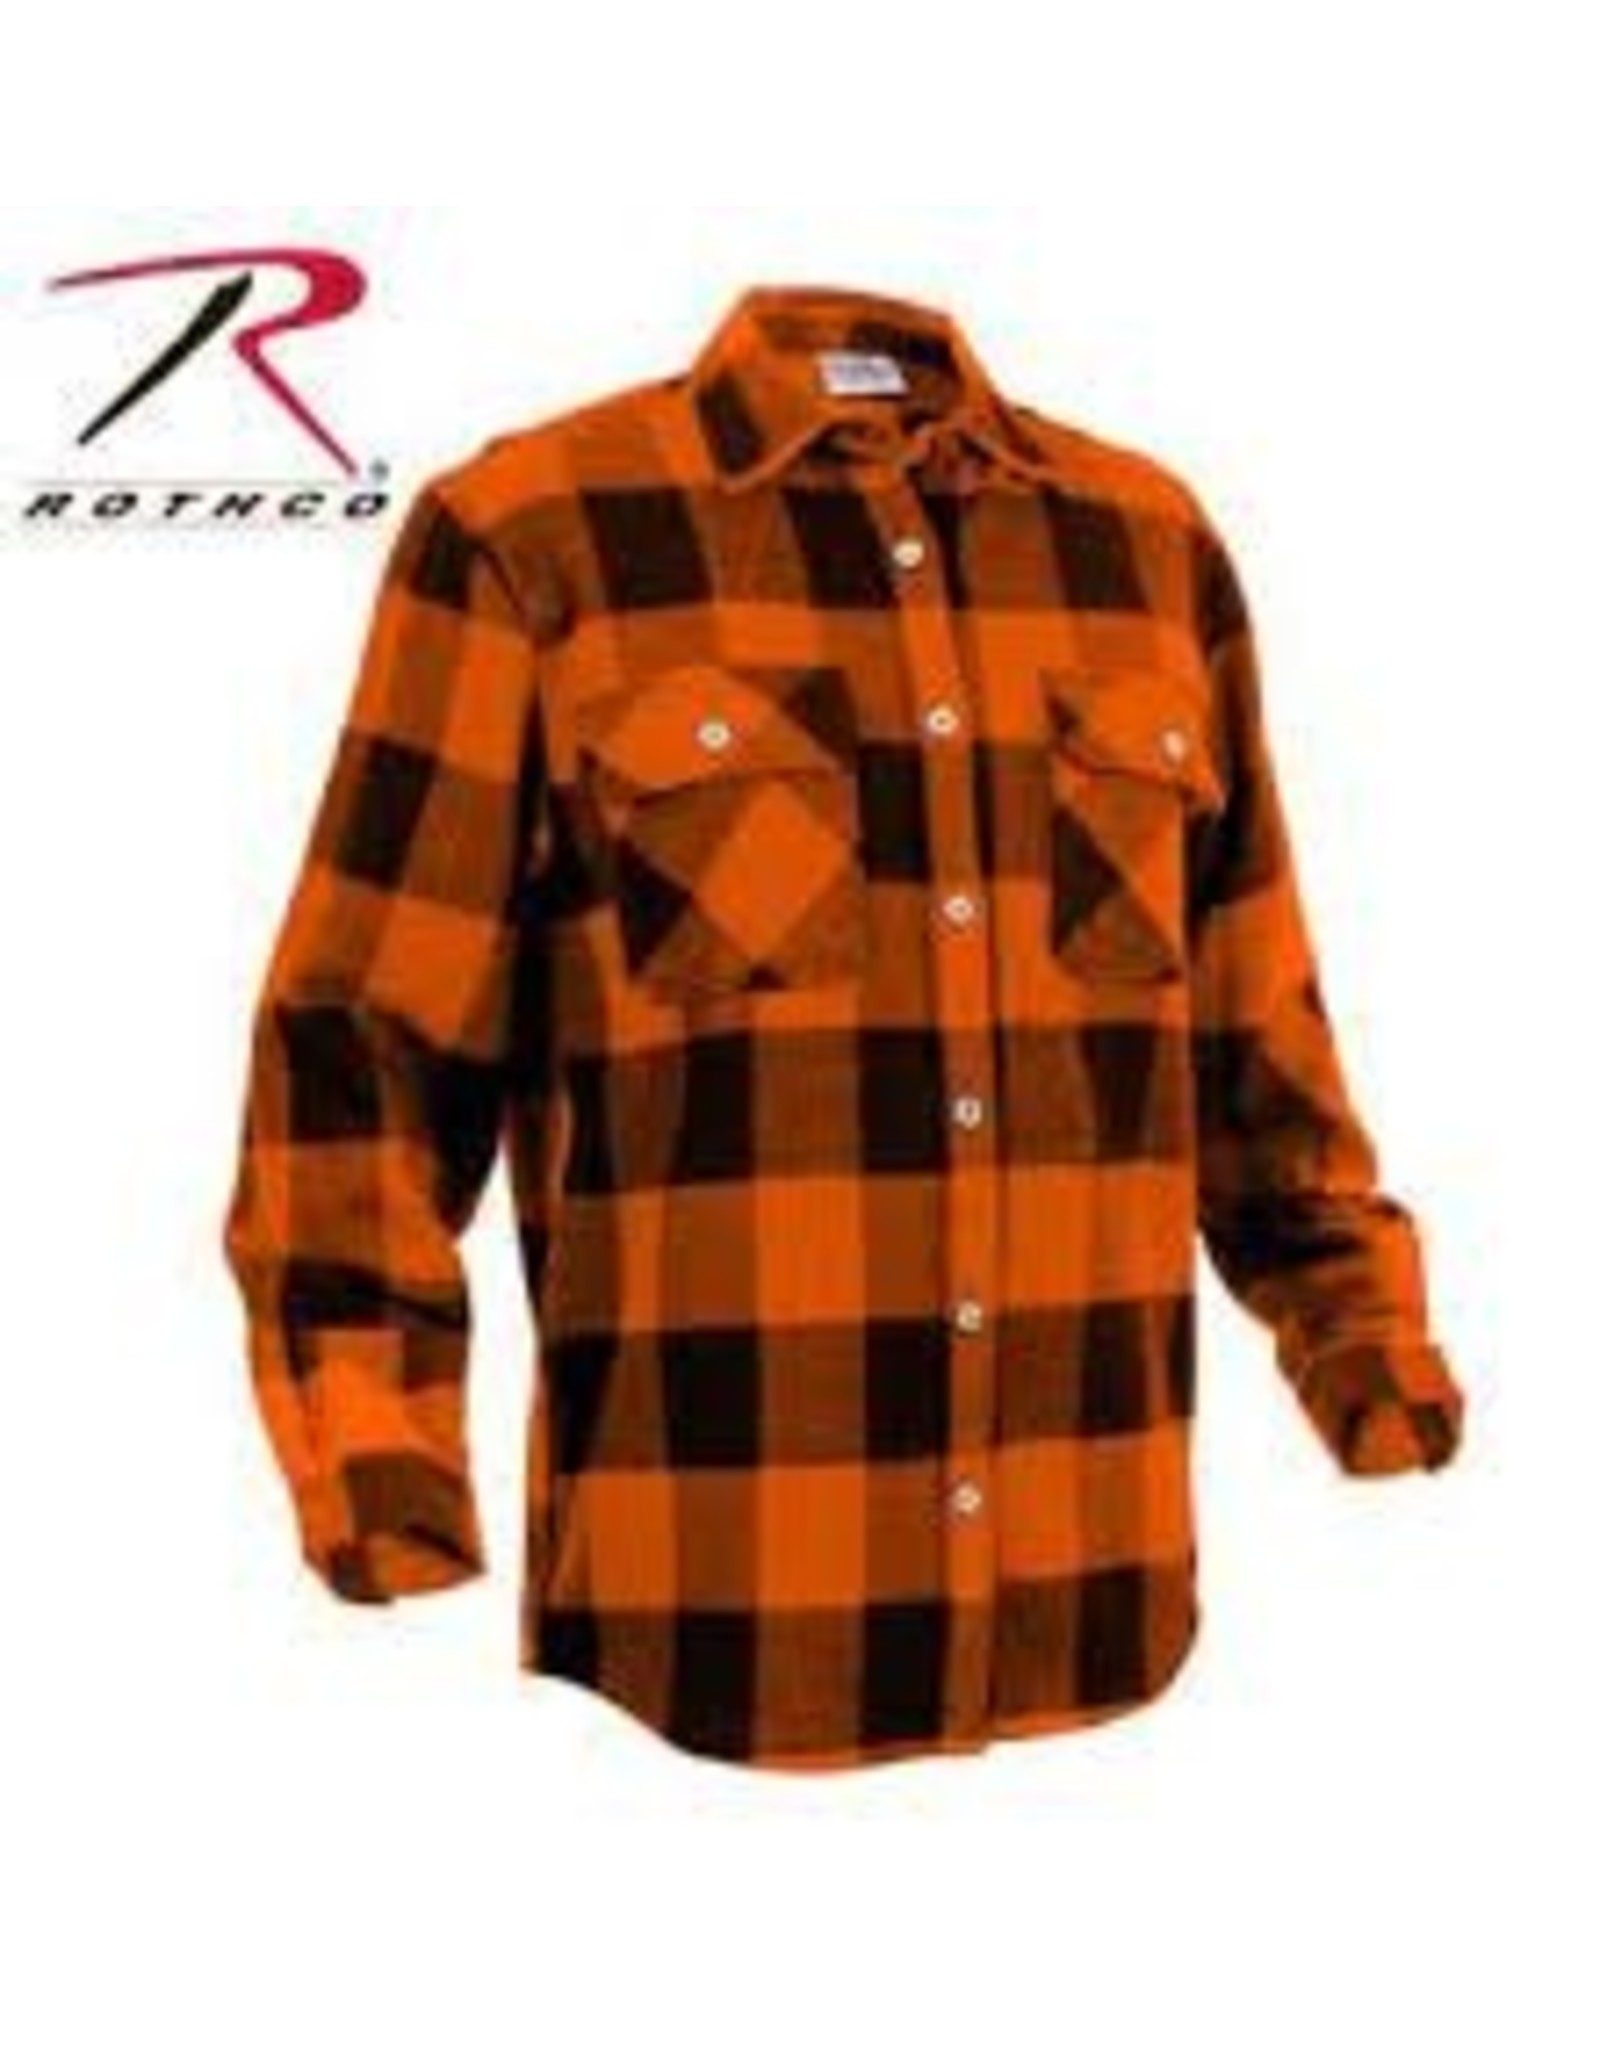 ROTHCO EXTRA HEAVY WEIGHT FLANNEL SHIRT